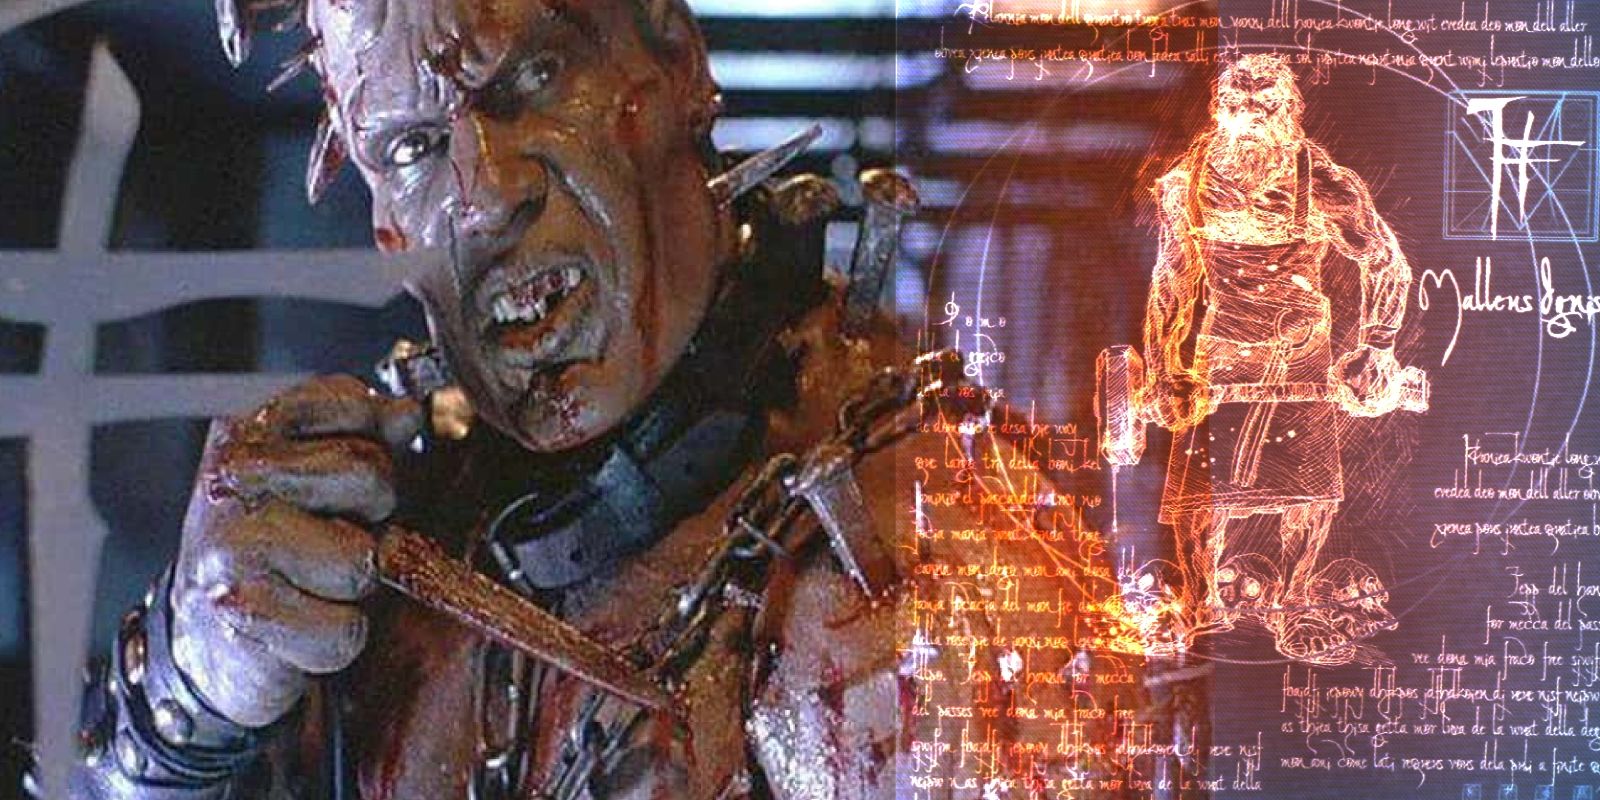 An illustration and actual still of The Hammer in Thirteen Ghosts